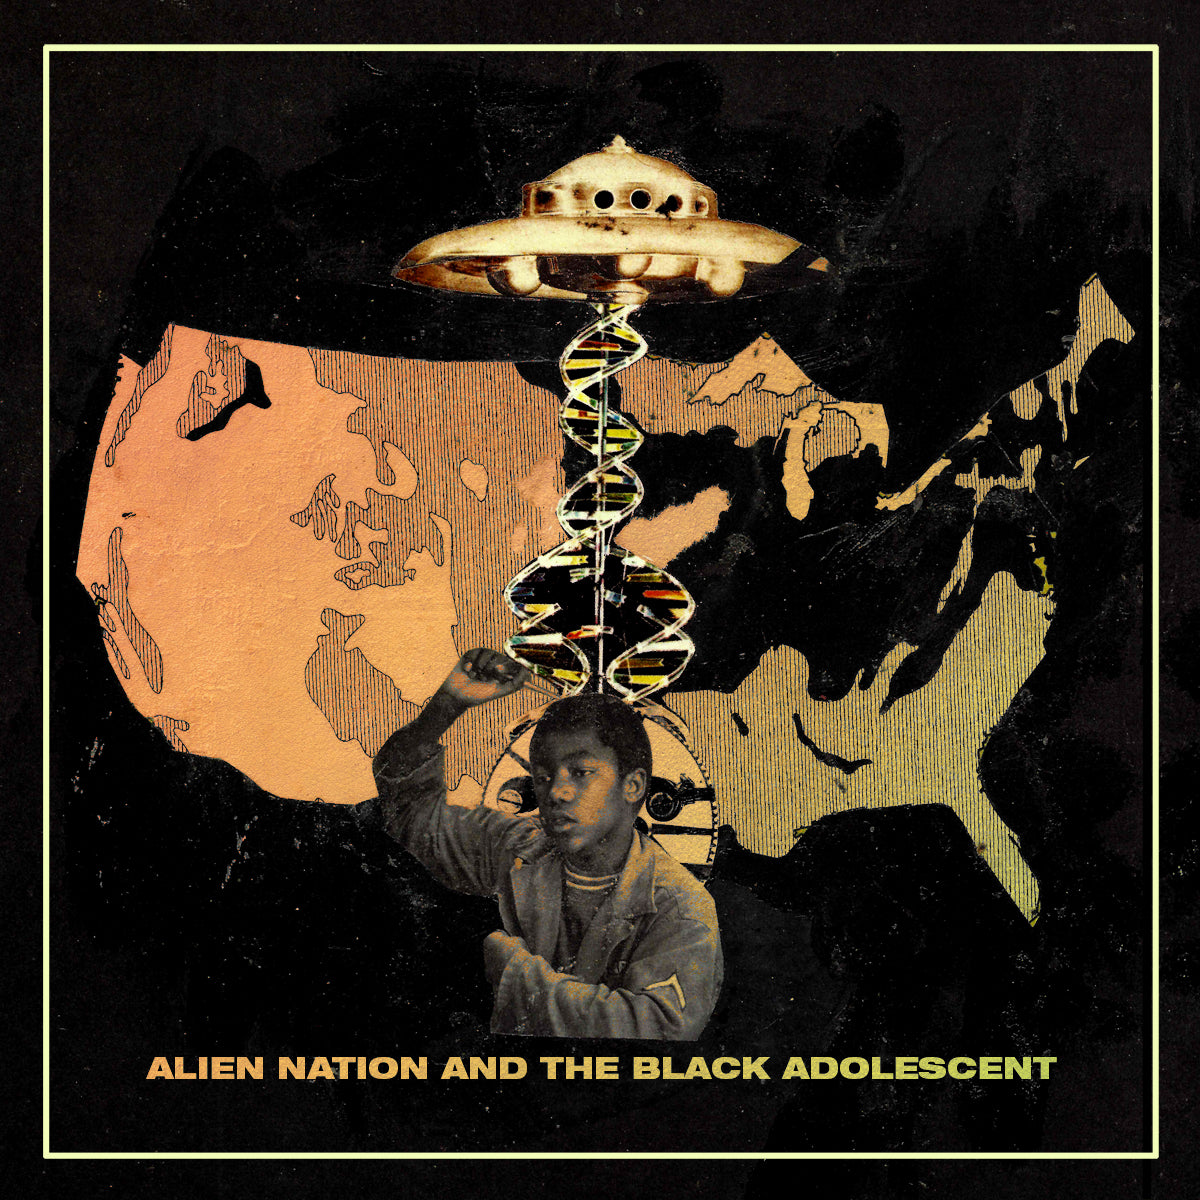 The Difference Machine - Alien Nation and the Black Adolescent (FP029)